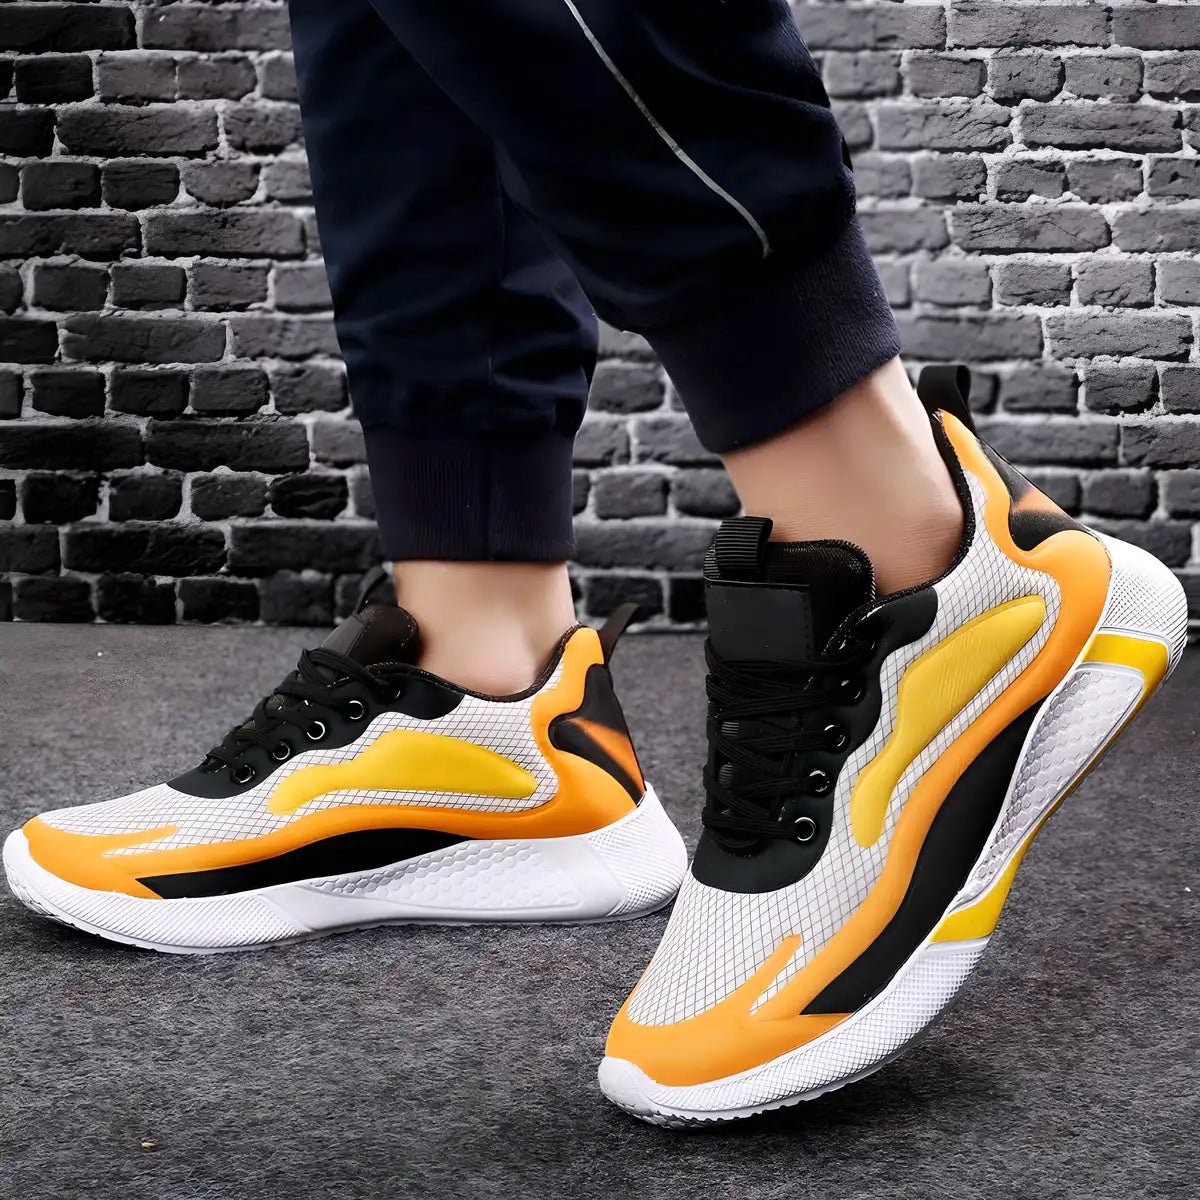 Shoe Island Casual Daily Wear Lace Ups Sports Running Shoes For Men